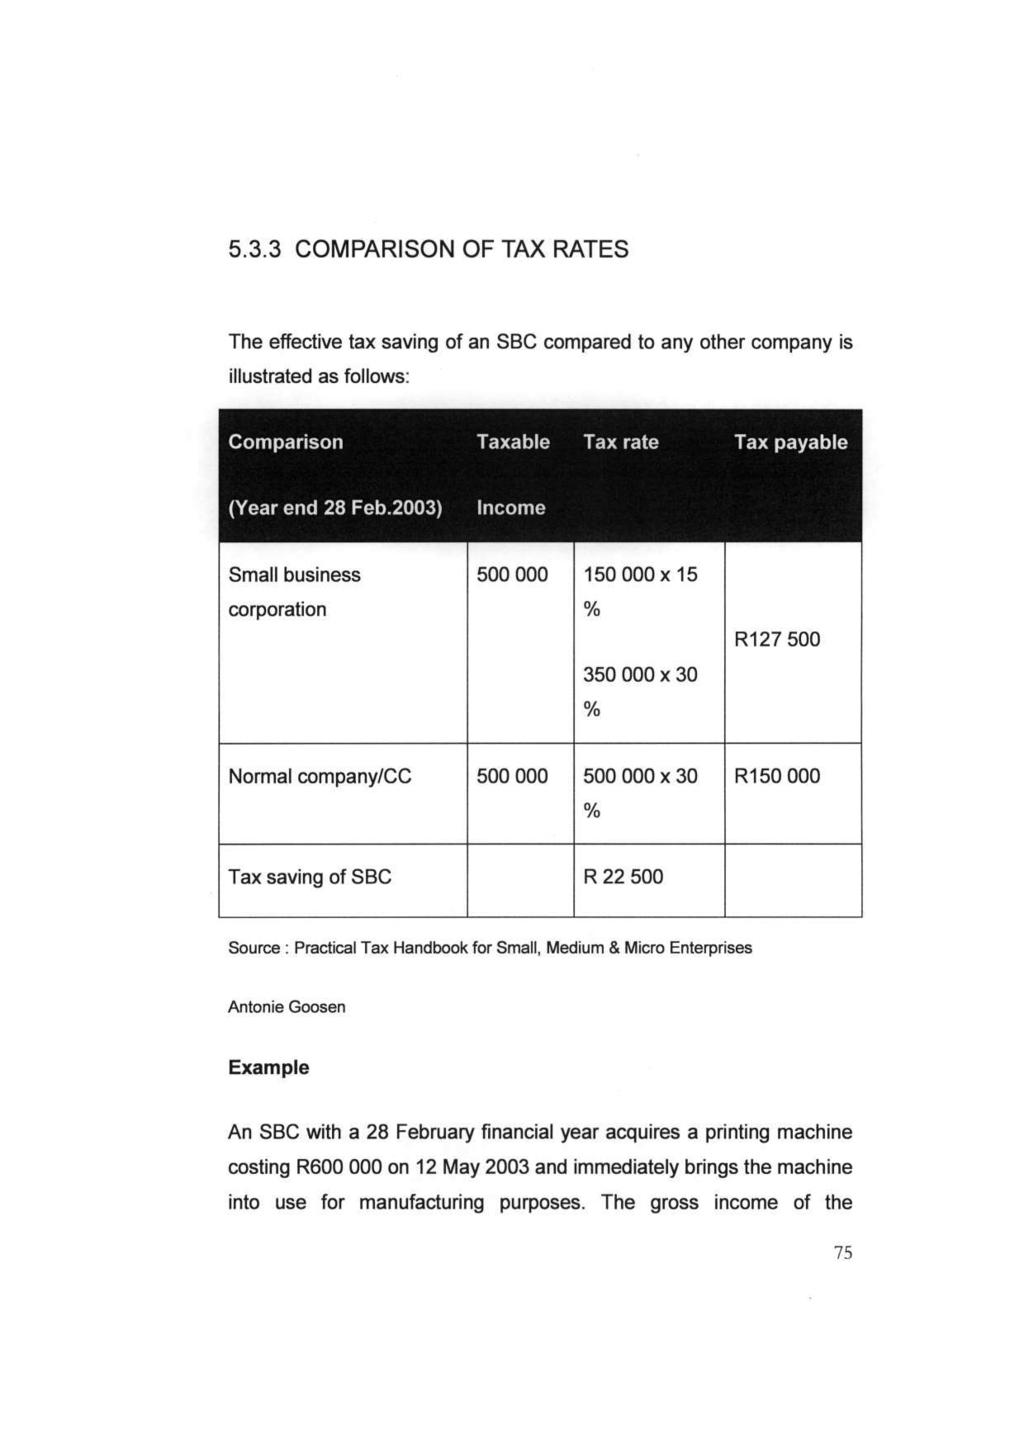 5.3.3 COMPARISON OF TAX RATES The effective tax saving of an SBC compared to any other company is illustrated as follows: Comparison Taxable Tax rate Tax payable (Year end 28 Feb.